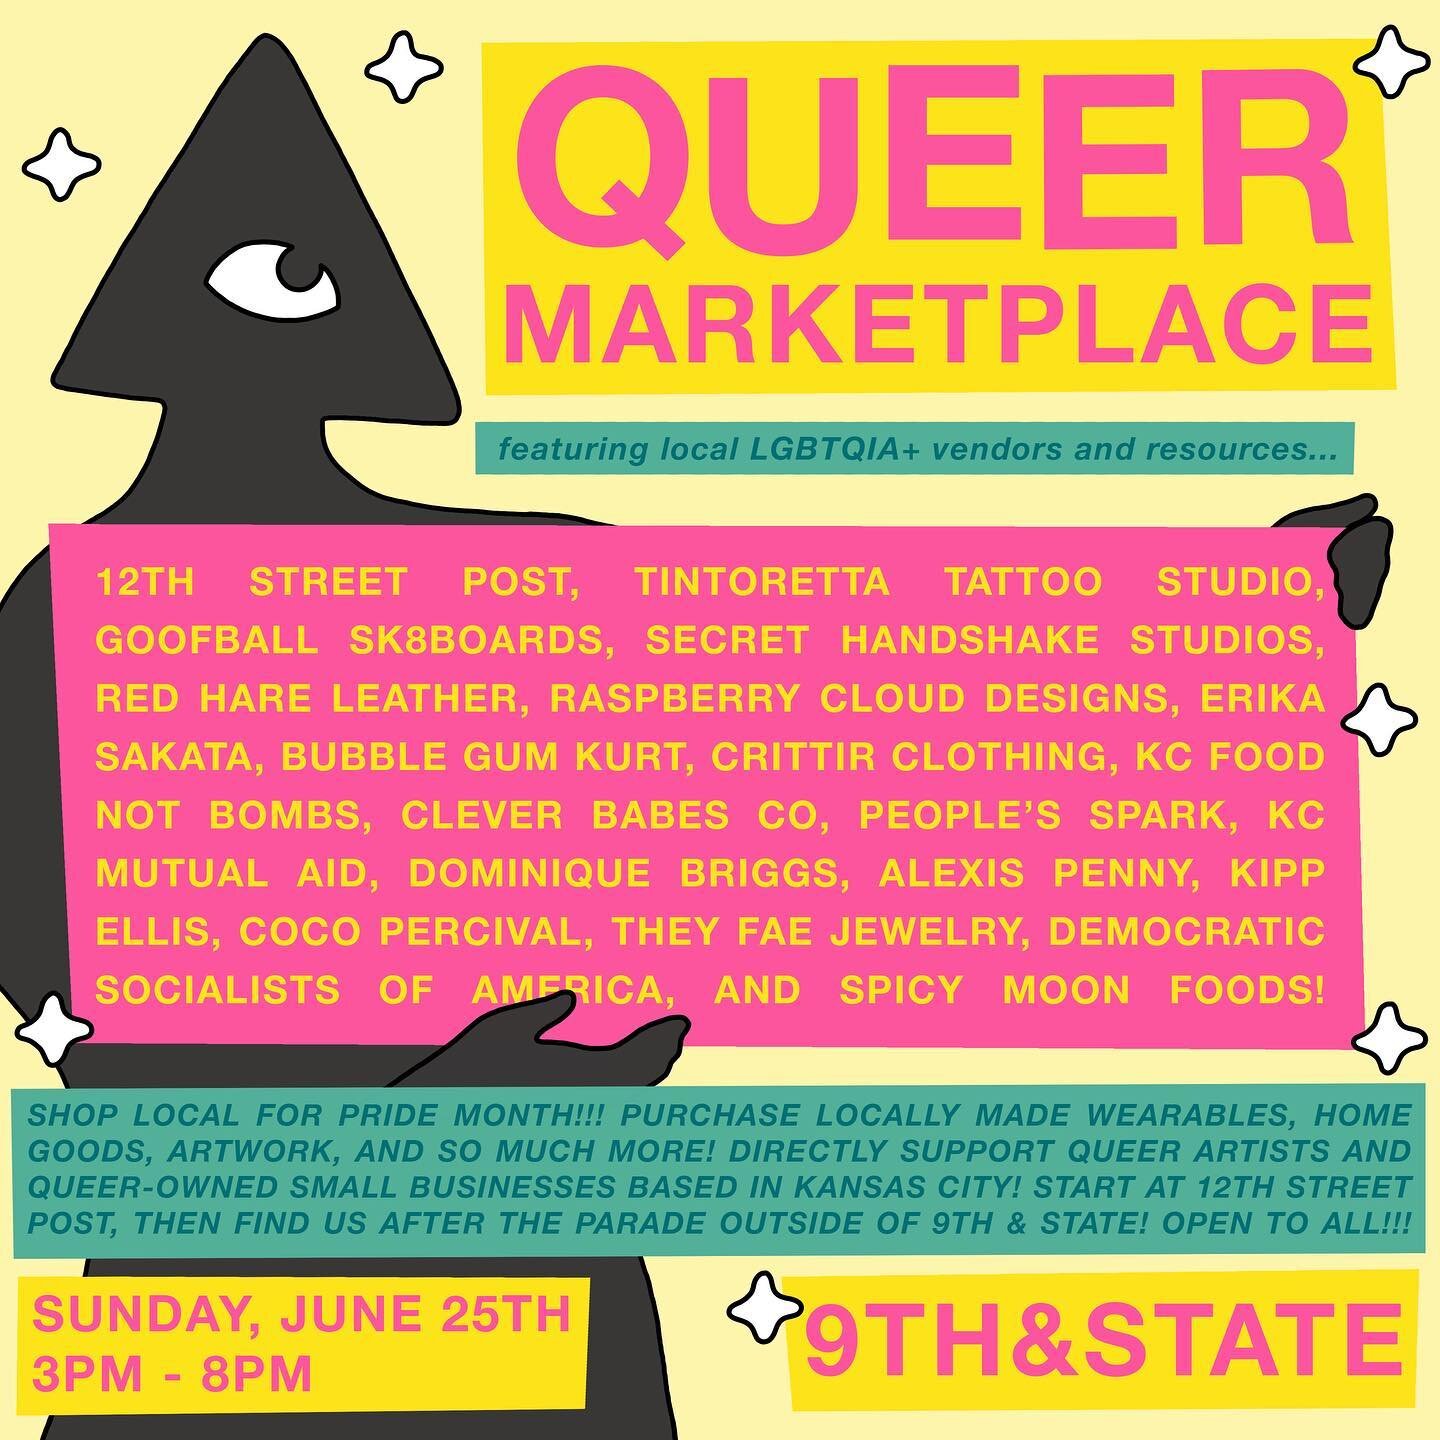 📡🌈Incoming Transmission!!!📡🌈

We&rsquo;re organizing a Queer Marketplace for People&rsquo;s Pride on Sunday, June 25th! Find us at 9th &amp; State after the parade from 3pm - 8pm for an incredible outdoor shopping experience! You&rsquo;ll find an